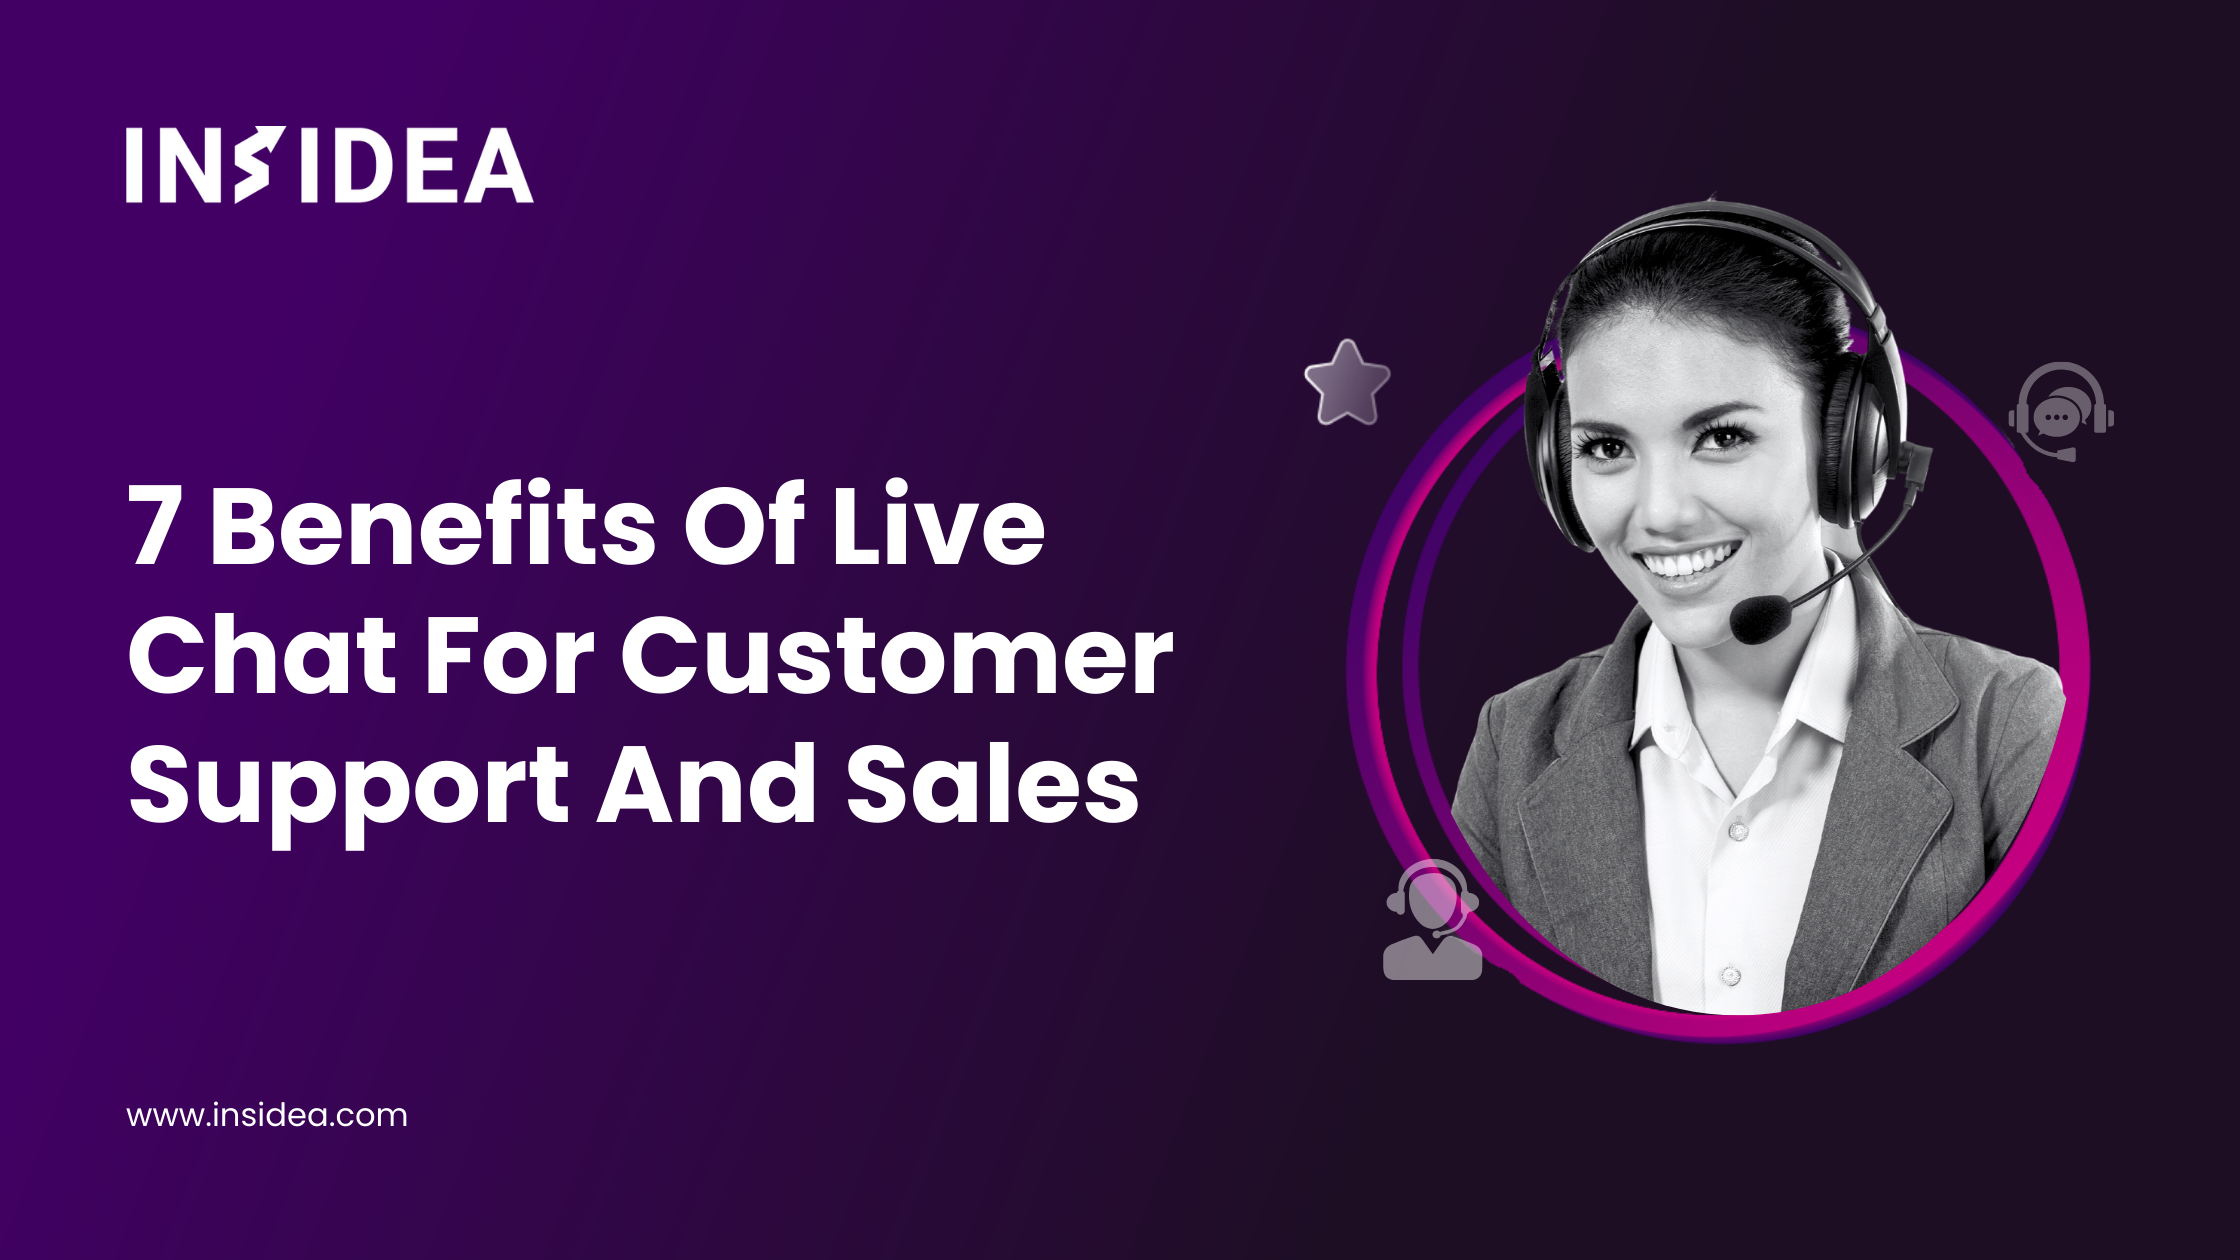 7 Benefits Of Live Chat For Customer Support And Sales